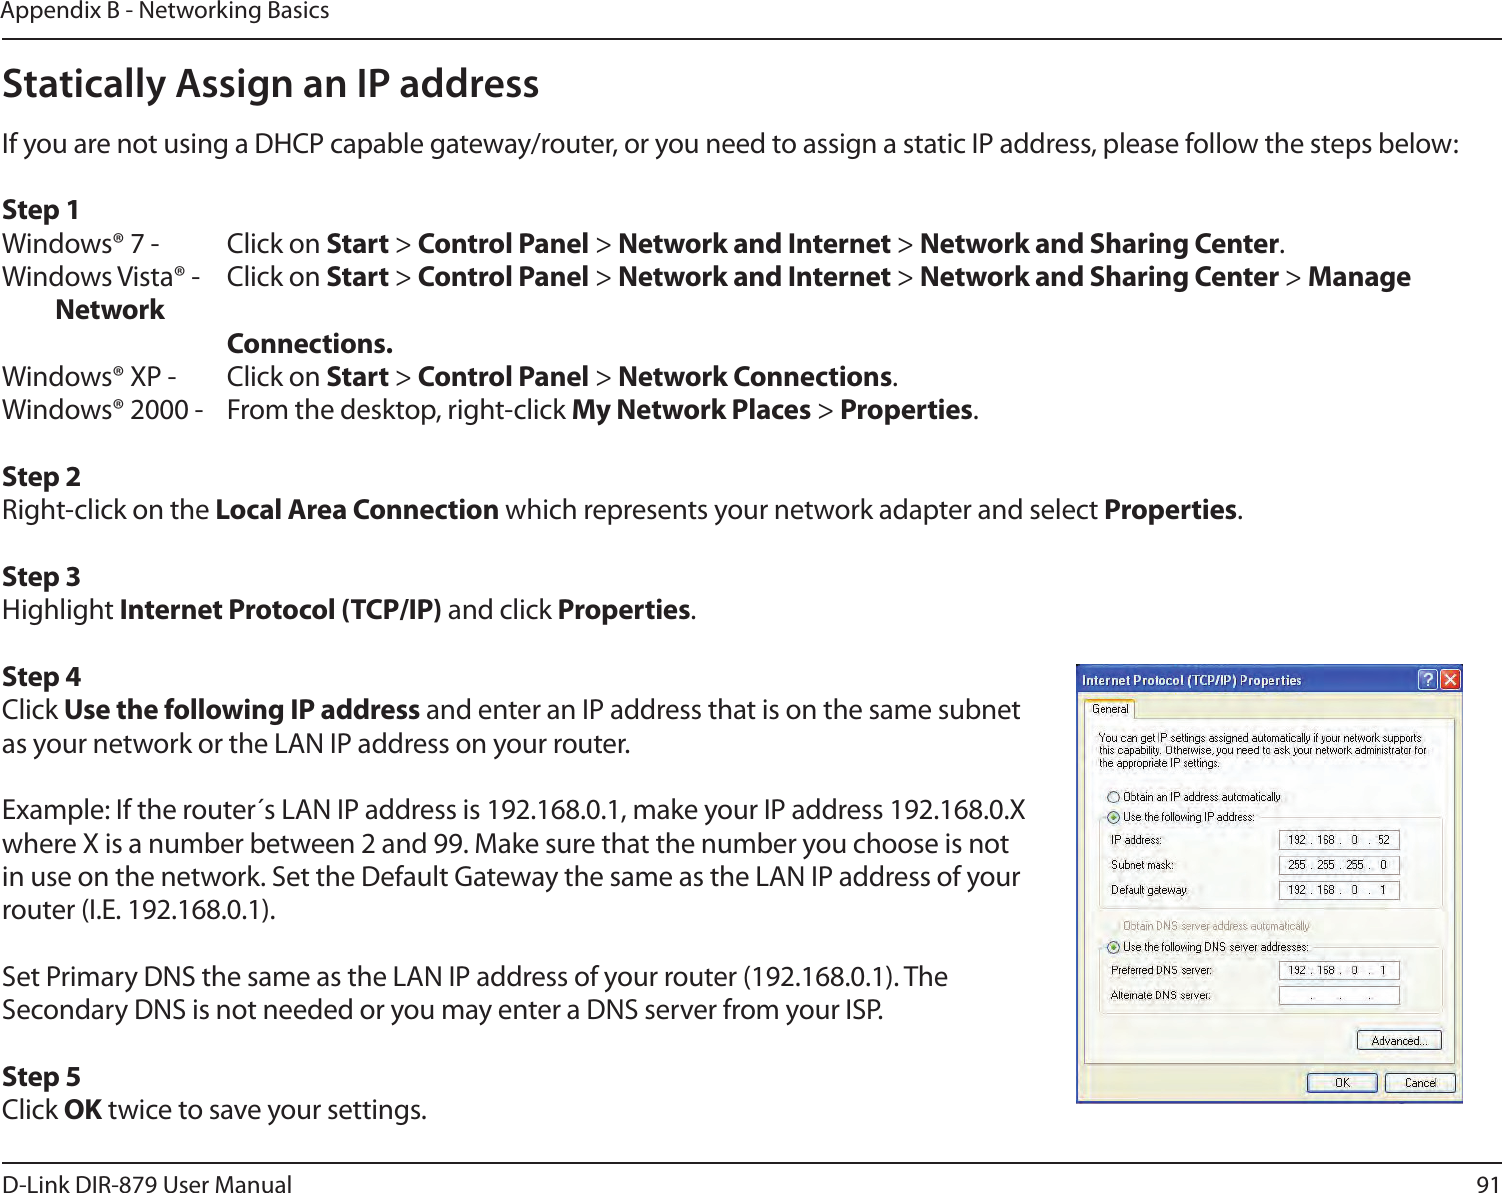 91D-Link DIR-879 User ManualAppendix B - Networking BasicsStatically Assign an IP addressIf you are not using a DHCP capable gateway/router, or you need to assign a static IP address, please follow the steps below:Step 1Windows® 7 -  Click on Start &gt; Control Panel &gt; Network and Internet &gt; Network and Sharing Center.Windows Vista® -  Click on Start &gt; Control Panel &gt; Network and Internet &gt; Network and Sharing Center &gt; Manage Network    Connections.Windows® XP -  Click on Start &gt; Control Panel &gt; Network Connections.Windows® 2000 -  From the desktop, right-click My Network Places &gt; Properties.Step 2Right-click on the Local Area Connection which represents your network adapter and select Properties.Step 3Highlight Internet Protocol (TCP/IP) and click Properties.Step 4Click Use the following IP address and enter an IP address that is on the same subnet as your network or the LAN IP address on your router. Example: If the router´s LAN IP address is 192.168.0.1, make your IP address 192.168.0.X where X is a number between 2 and 99. Make sure that the number you choose is not in use on the network. Set the Default Gateway the same as the LAN IP address of your router (I.E. 192.168.0.1). Set Primary DNS the same as the LAN IP address of your router (192.168.0.1). The Secondary DNS is not needed or you may enter a DNS server from your ISP.Step 5Click OK twice to save your settings.